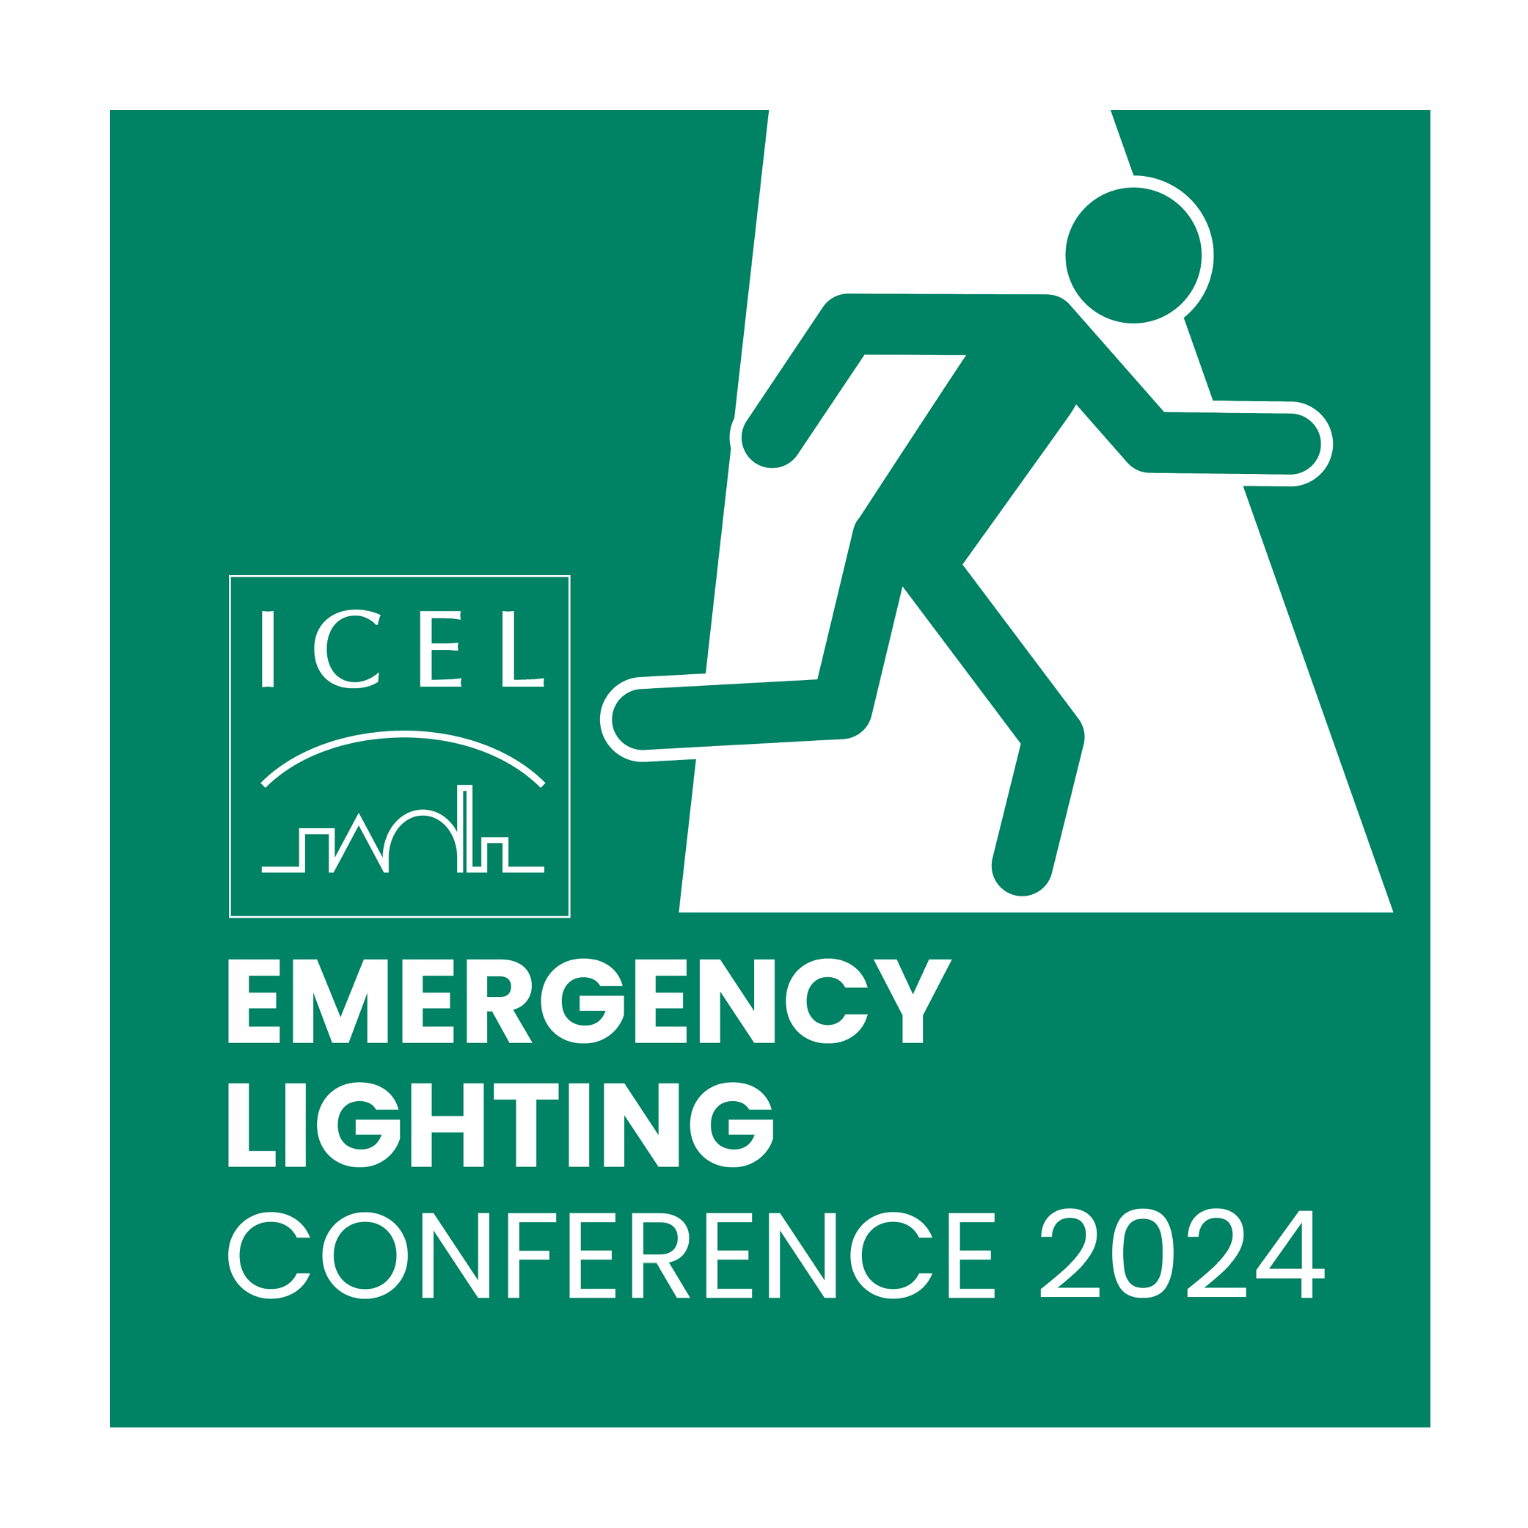 ICEL Emergency Lighting Conference is back again for 2024